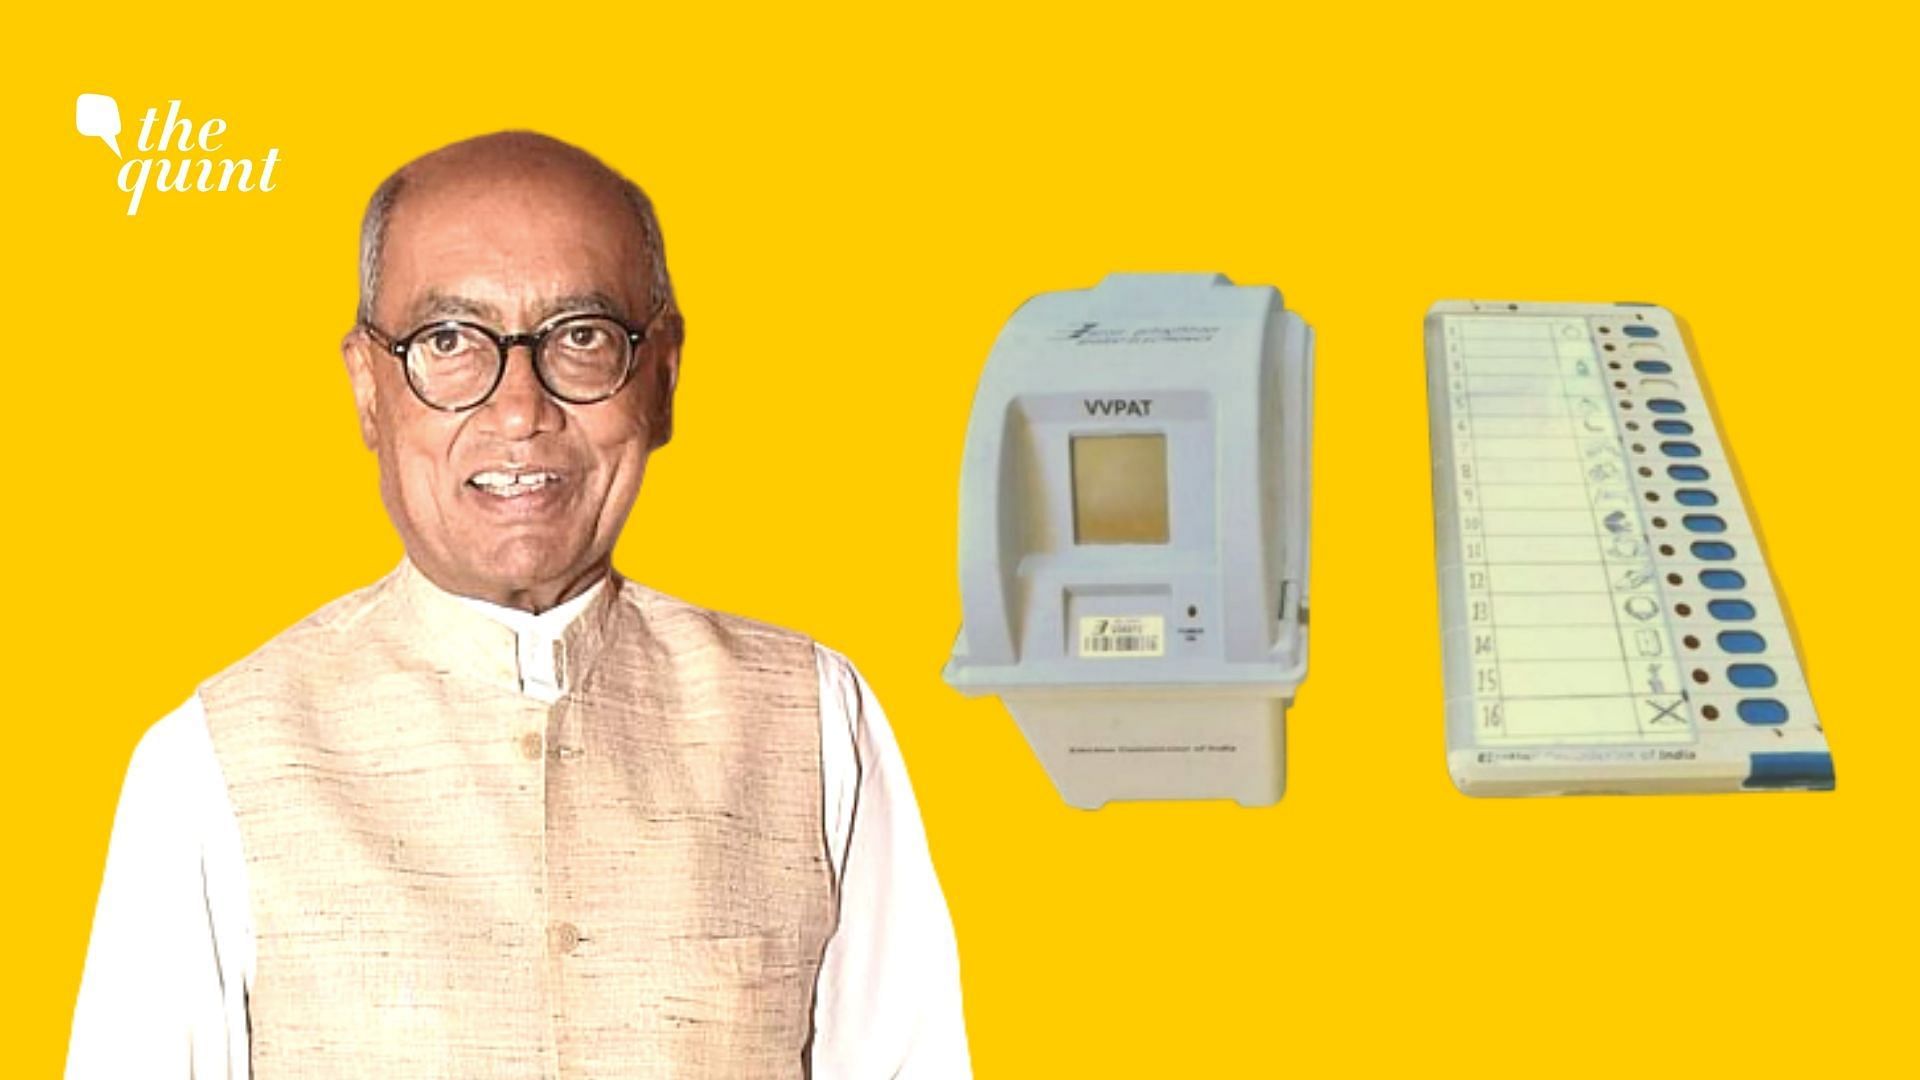 Retweeting a story by The Quint’s Poonam Aggarwal, Digvijaya Singh suggested a Ballot Paper verified EVM system instead of the existing EVM-VVPAT combination.